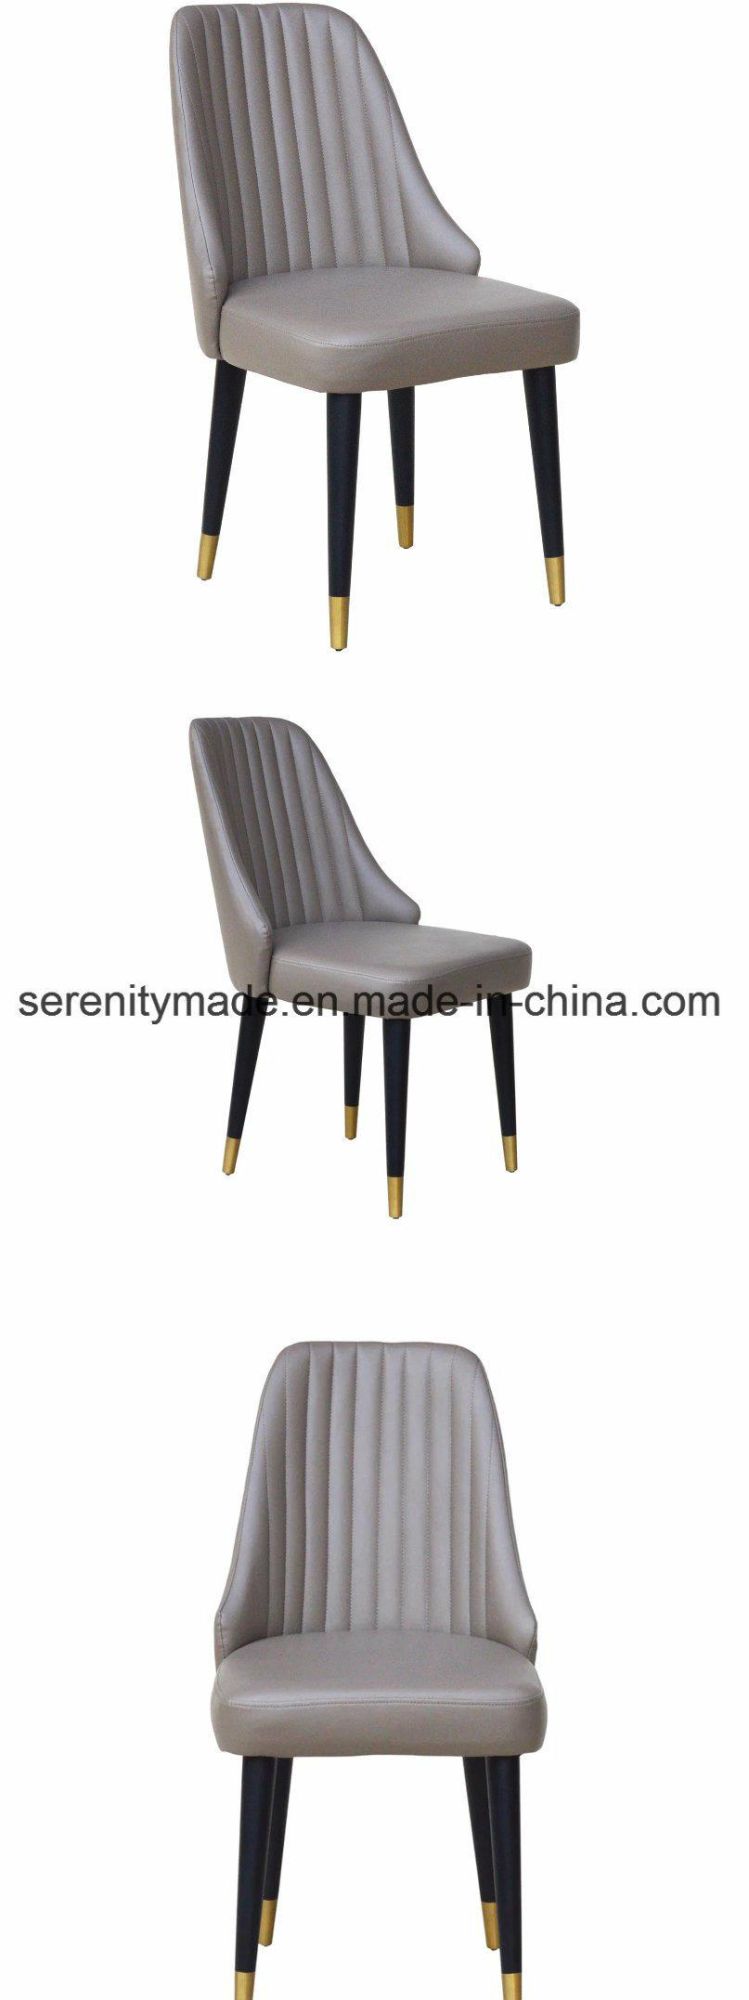 High-Grade Furniture Polished Feet PU Leather Upholstered Dining Side Chair